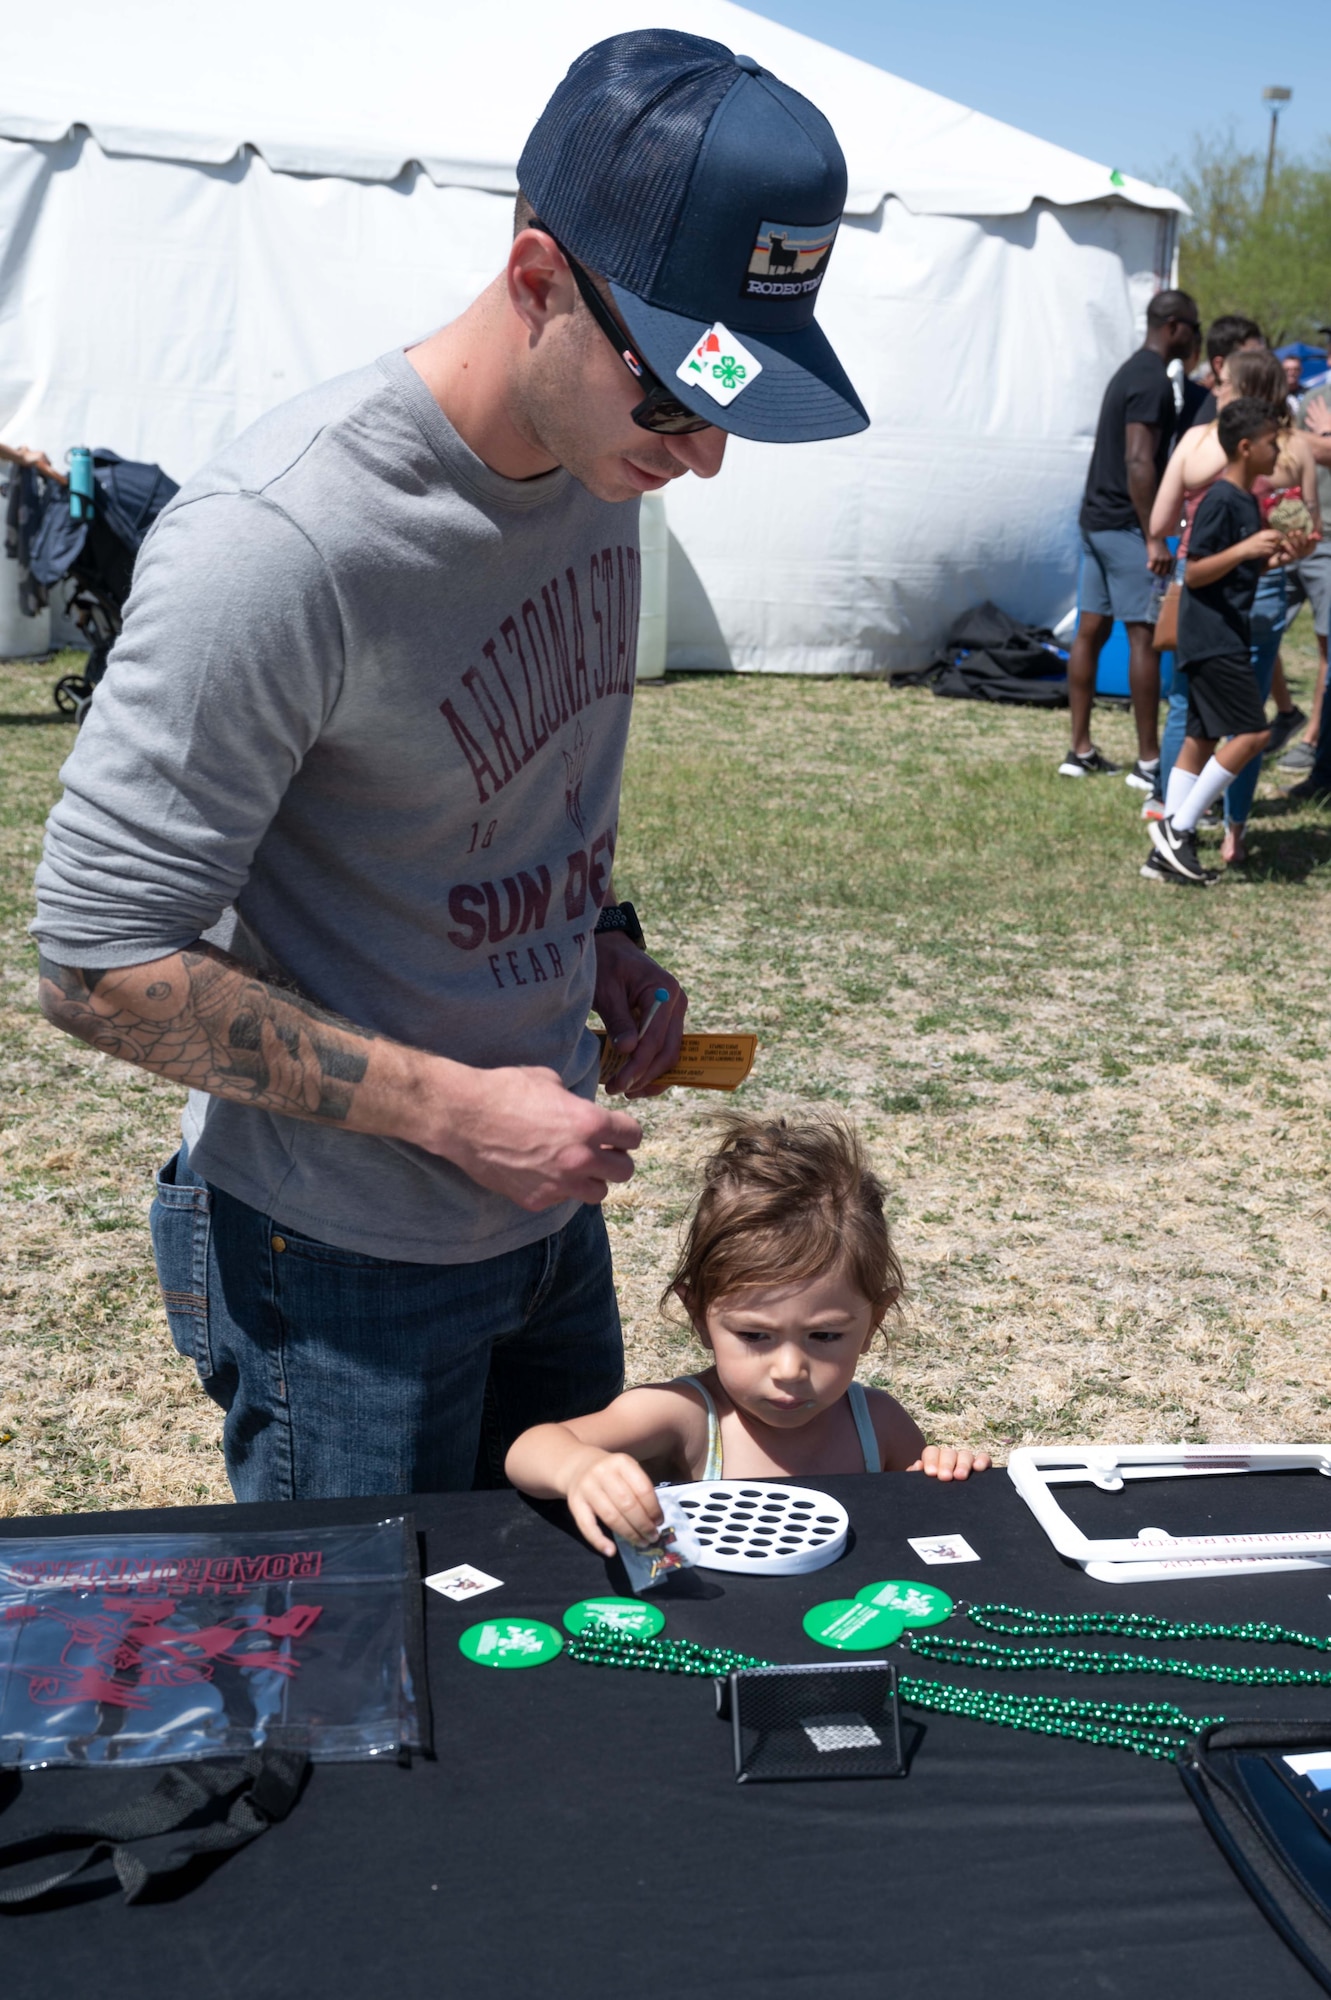 Airmen from the 162nd Wing enjoy time with their families during the 2022 Wing Family Day festivities held Pima Community College’s Desert Vista Campus on April 3.